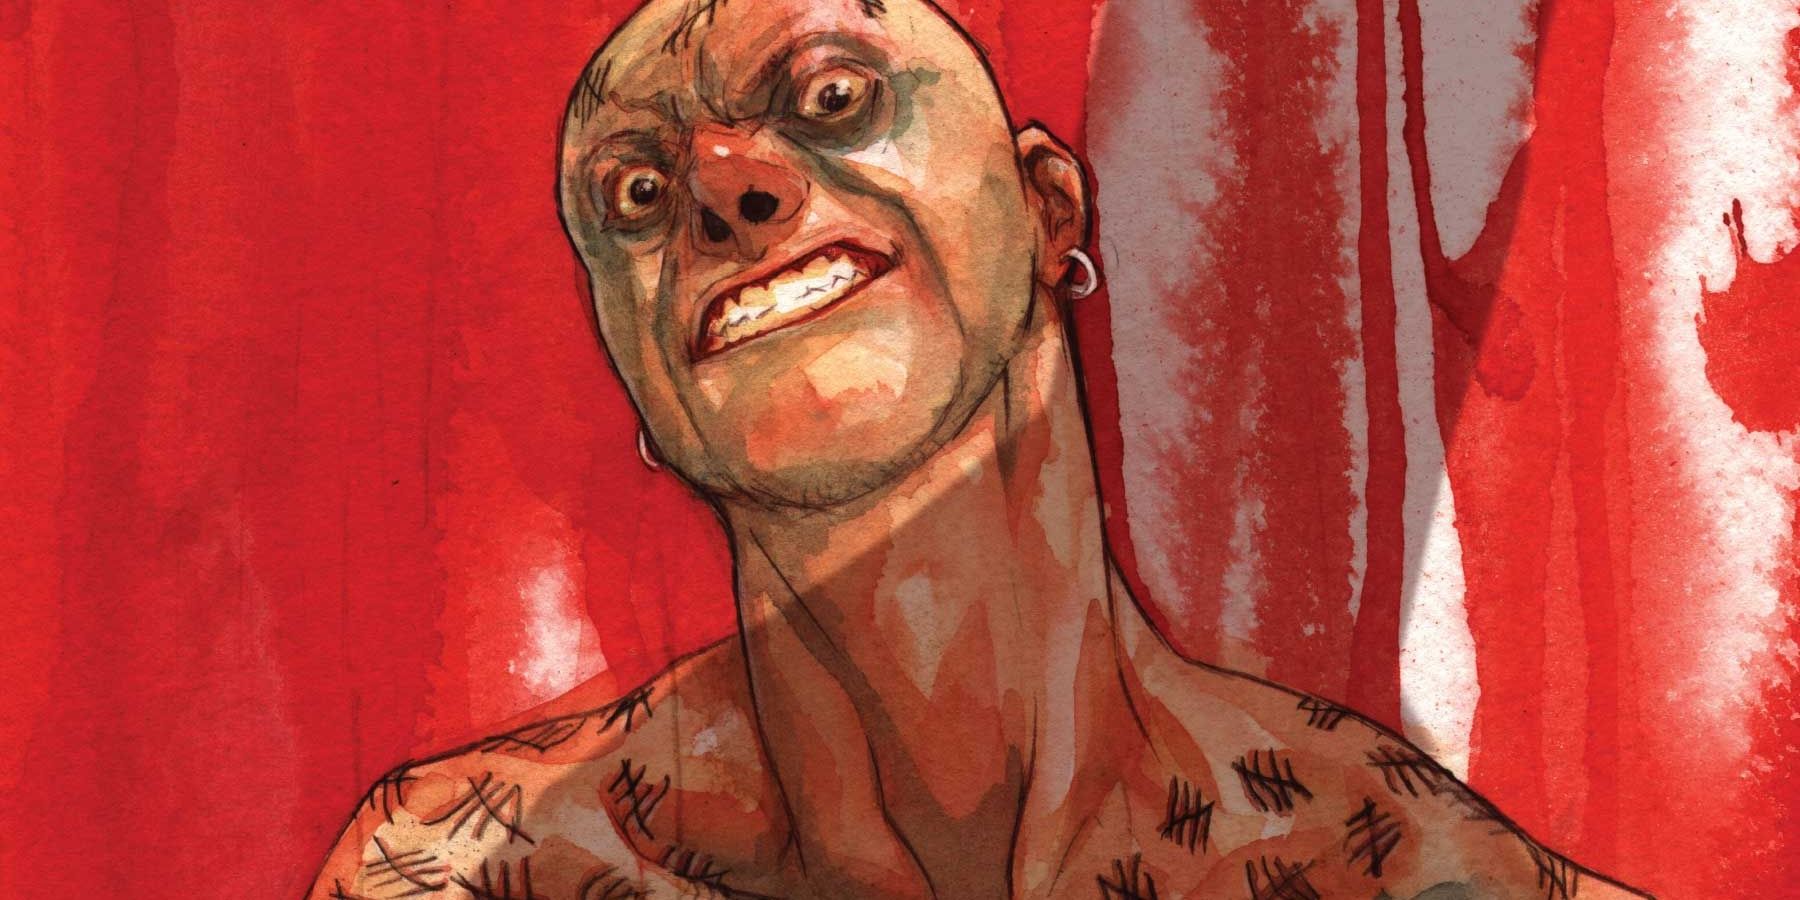 Victor Zsasz stares with blood on the wall in DC Comics